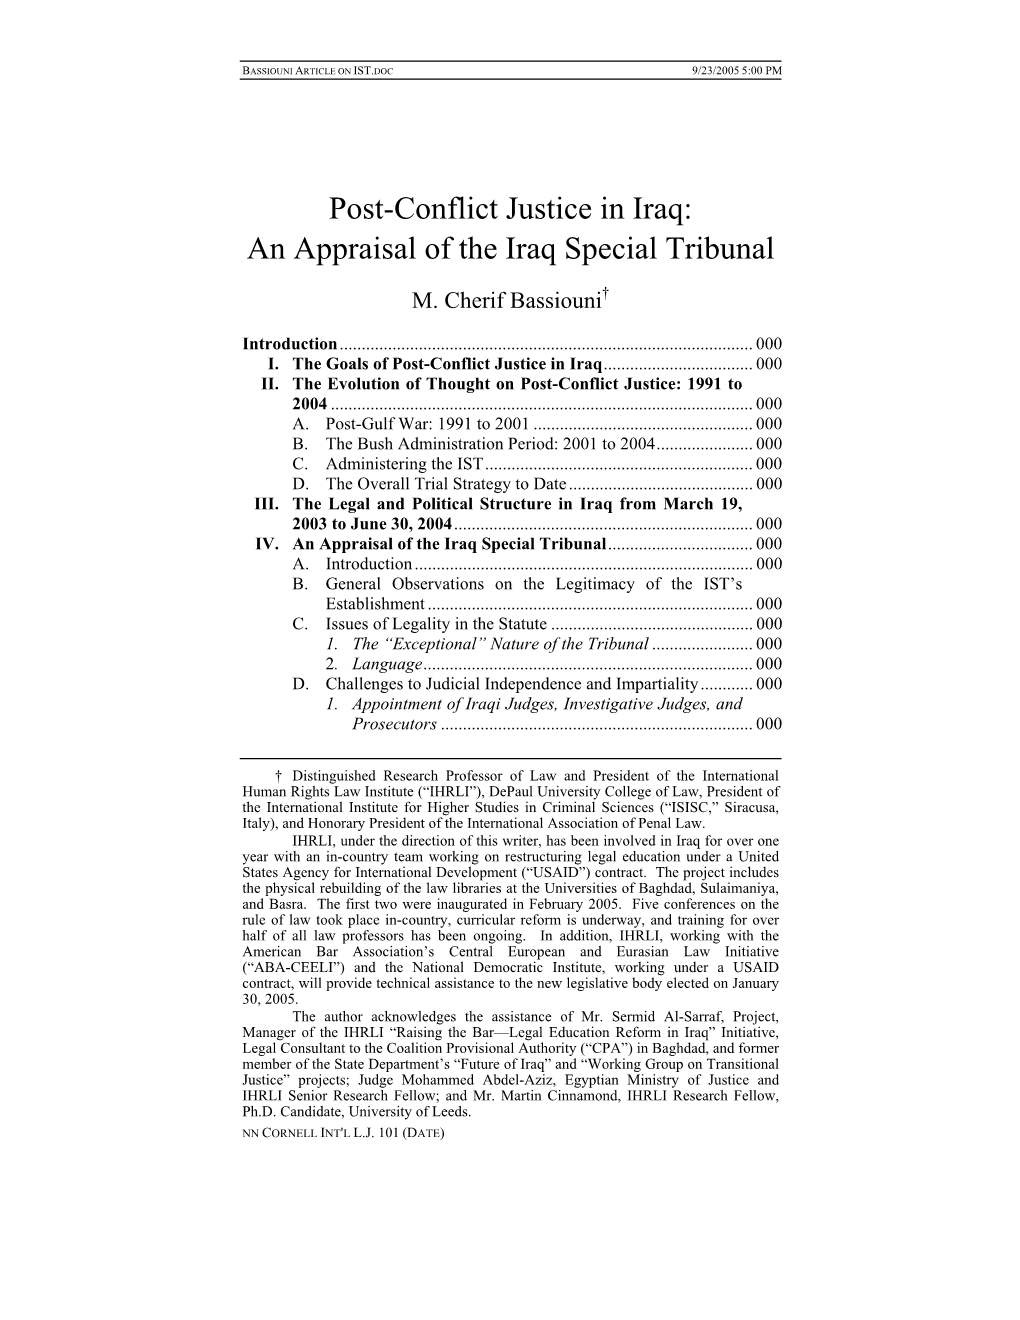 Post Conflict Justice in Iraq